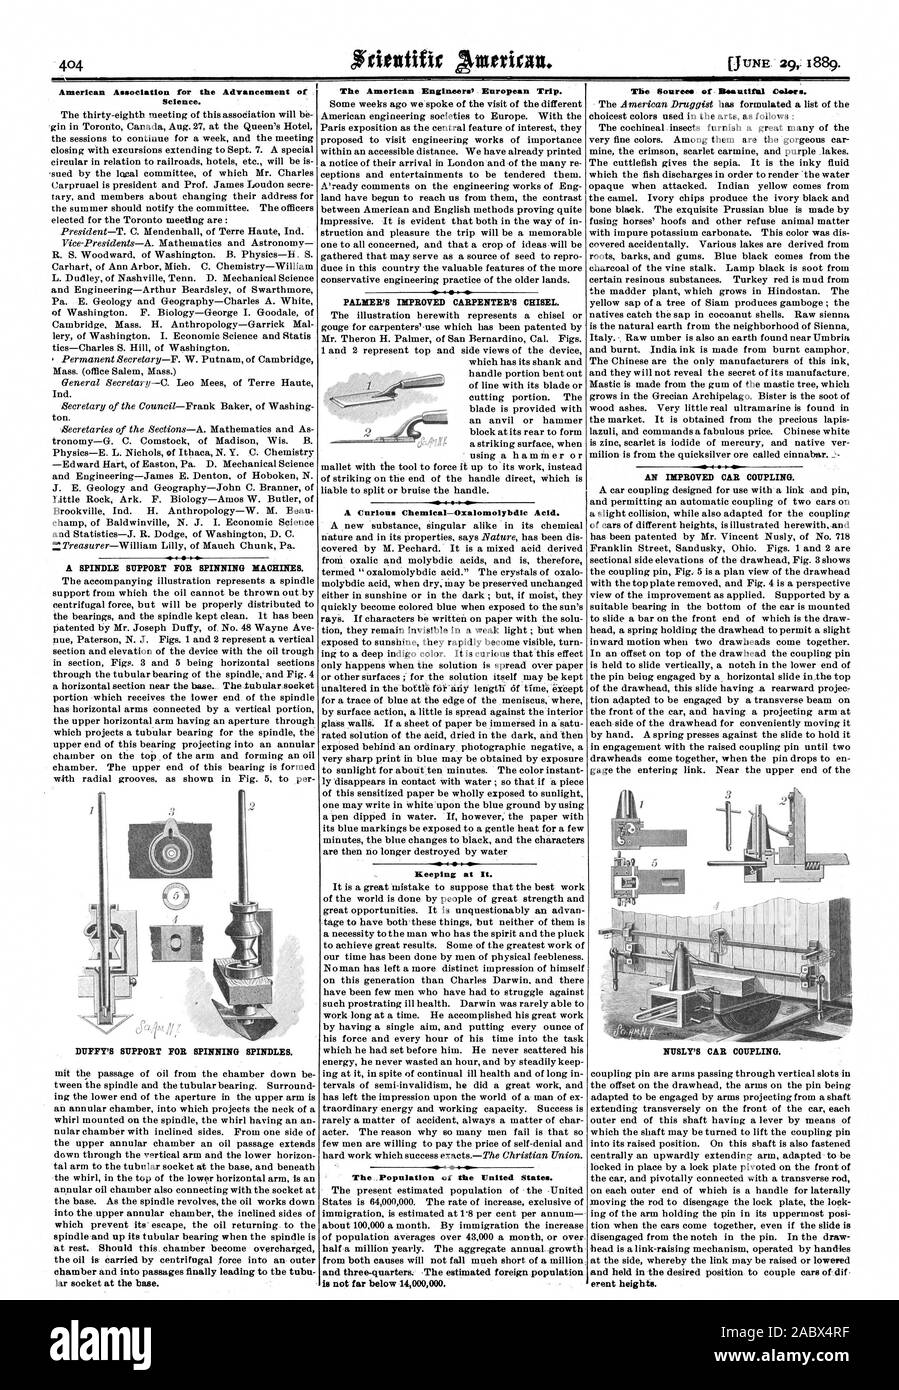 American Association for the Advancement of Science. A SPINDLE SUPPORT FOR SPINNING MACHINES. DUFFY'S SUPPORT FOR SPINNING SPINDLES. chamber and into passages finally leading to the tubu lar socket at the base. PALMER'S IMPROVED CARPENTER'S CHISEL. A Curious Chemical—Oxalomolybdic Acid. minutes the blue changes to black and the characters are then no longer destroyed by water Keeping at It. The Population of the United States. and three-quarters The estimated foreign population The Sourees of Beautiful Colors. AN IMPROVED CAR COUPLING. NUSLY'S CAR COUPLING. erent heights., scientific american Stock Photo